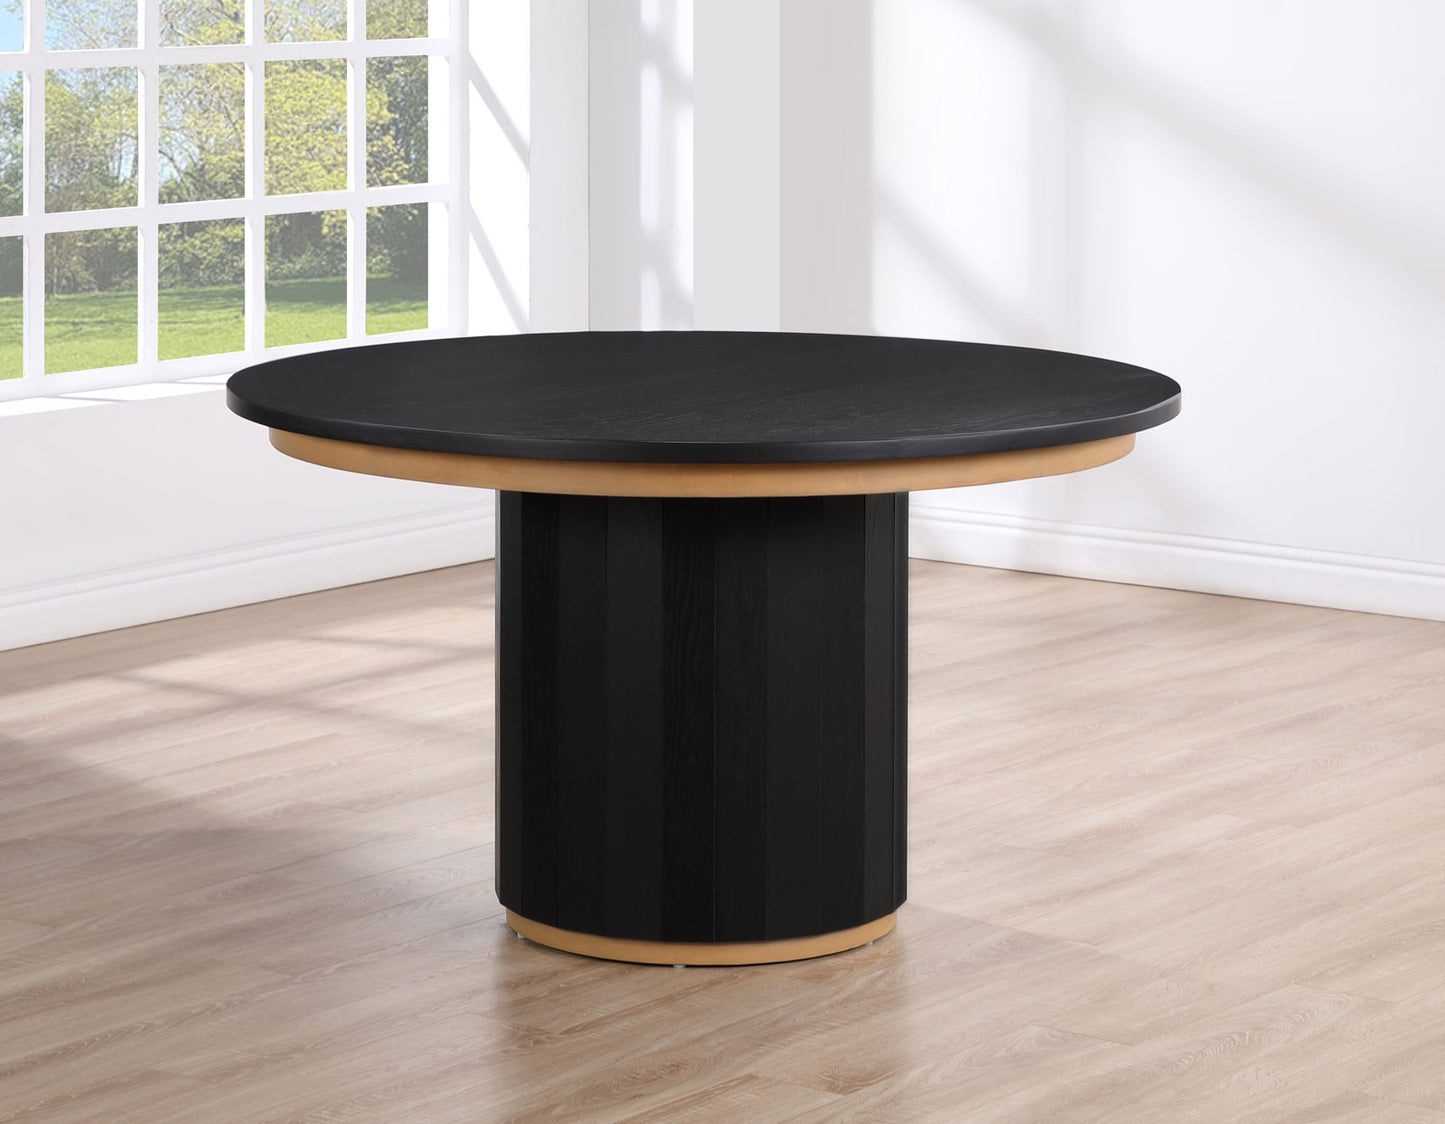 Magnolia Black 5-Piece Round Dining Set with Wooden Seat Chair